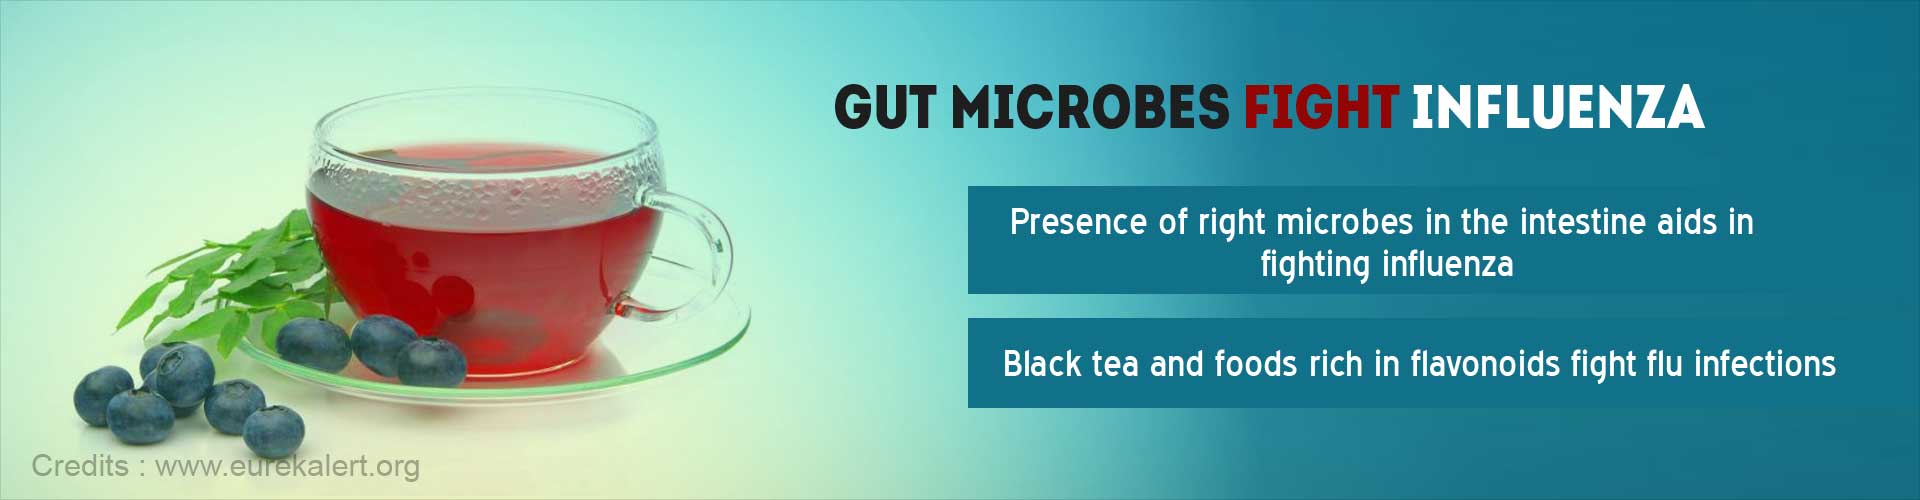 gut microbes fight influenza
- presence of right microbes in the intestine aids in fighting infuenza
- black tea and foods rich in flavonoids fight fly infections
